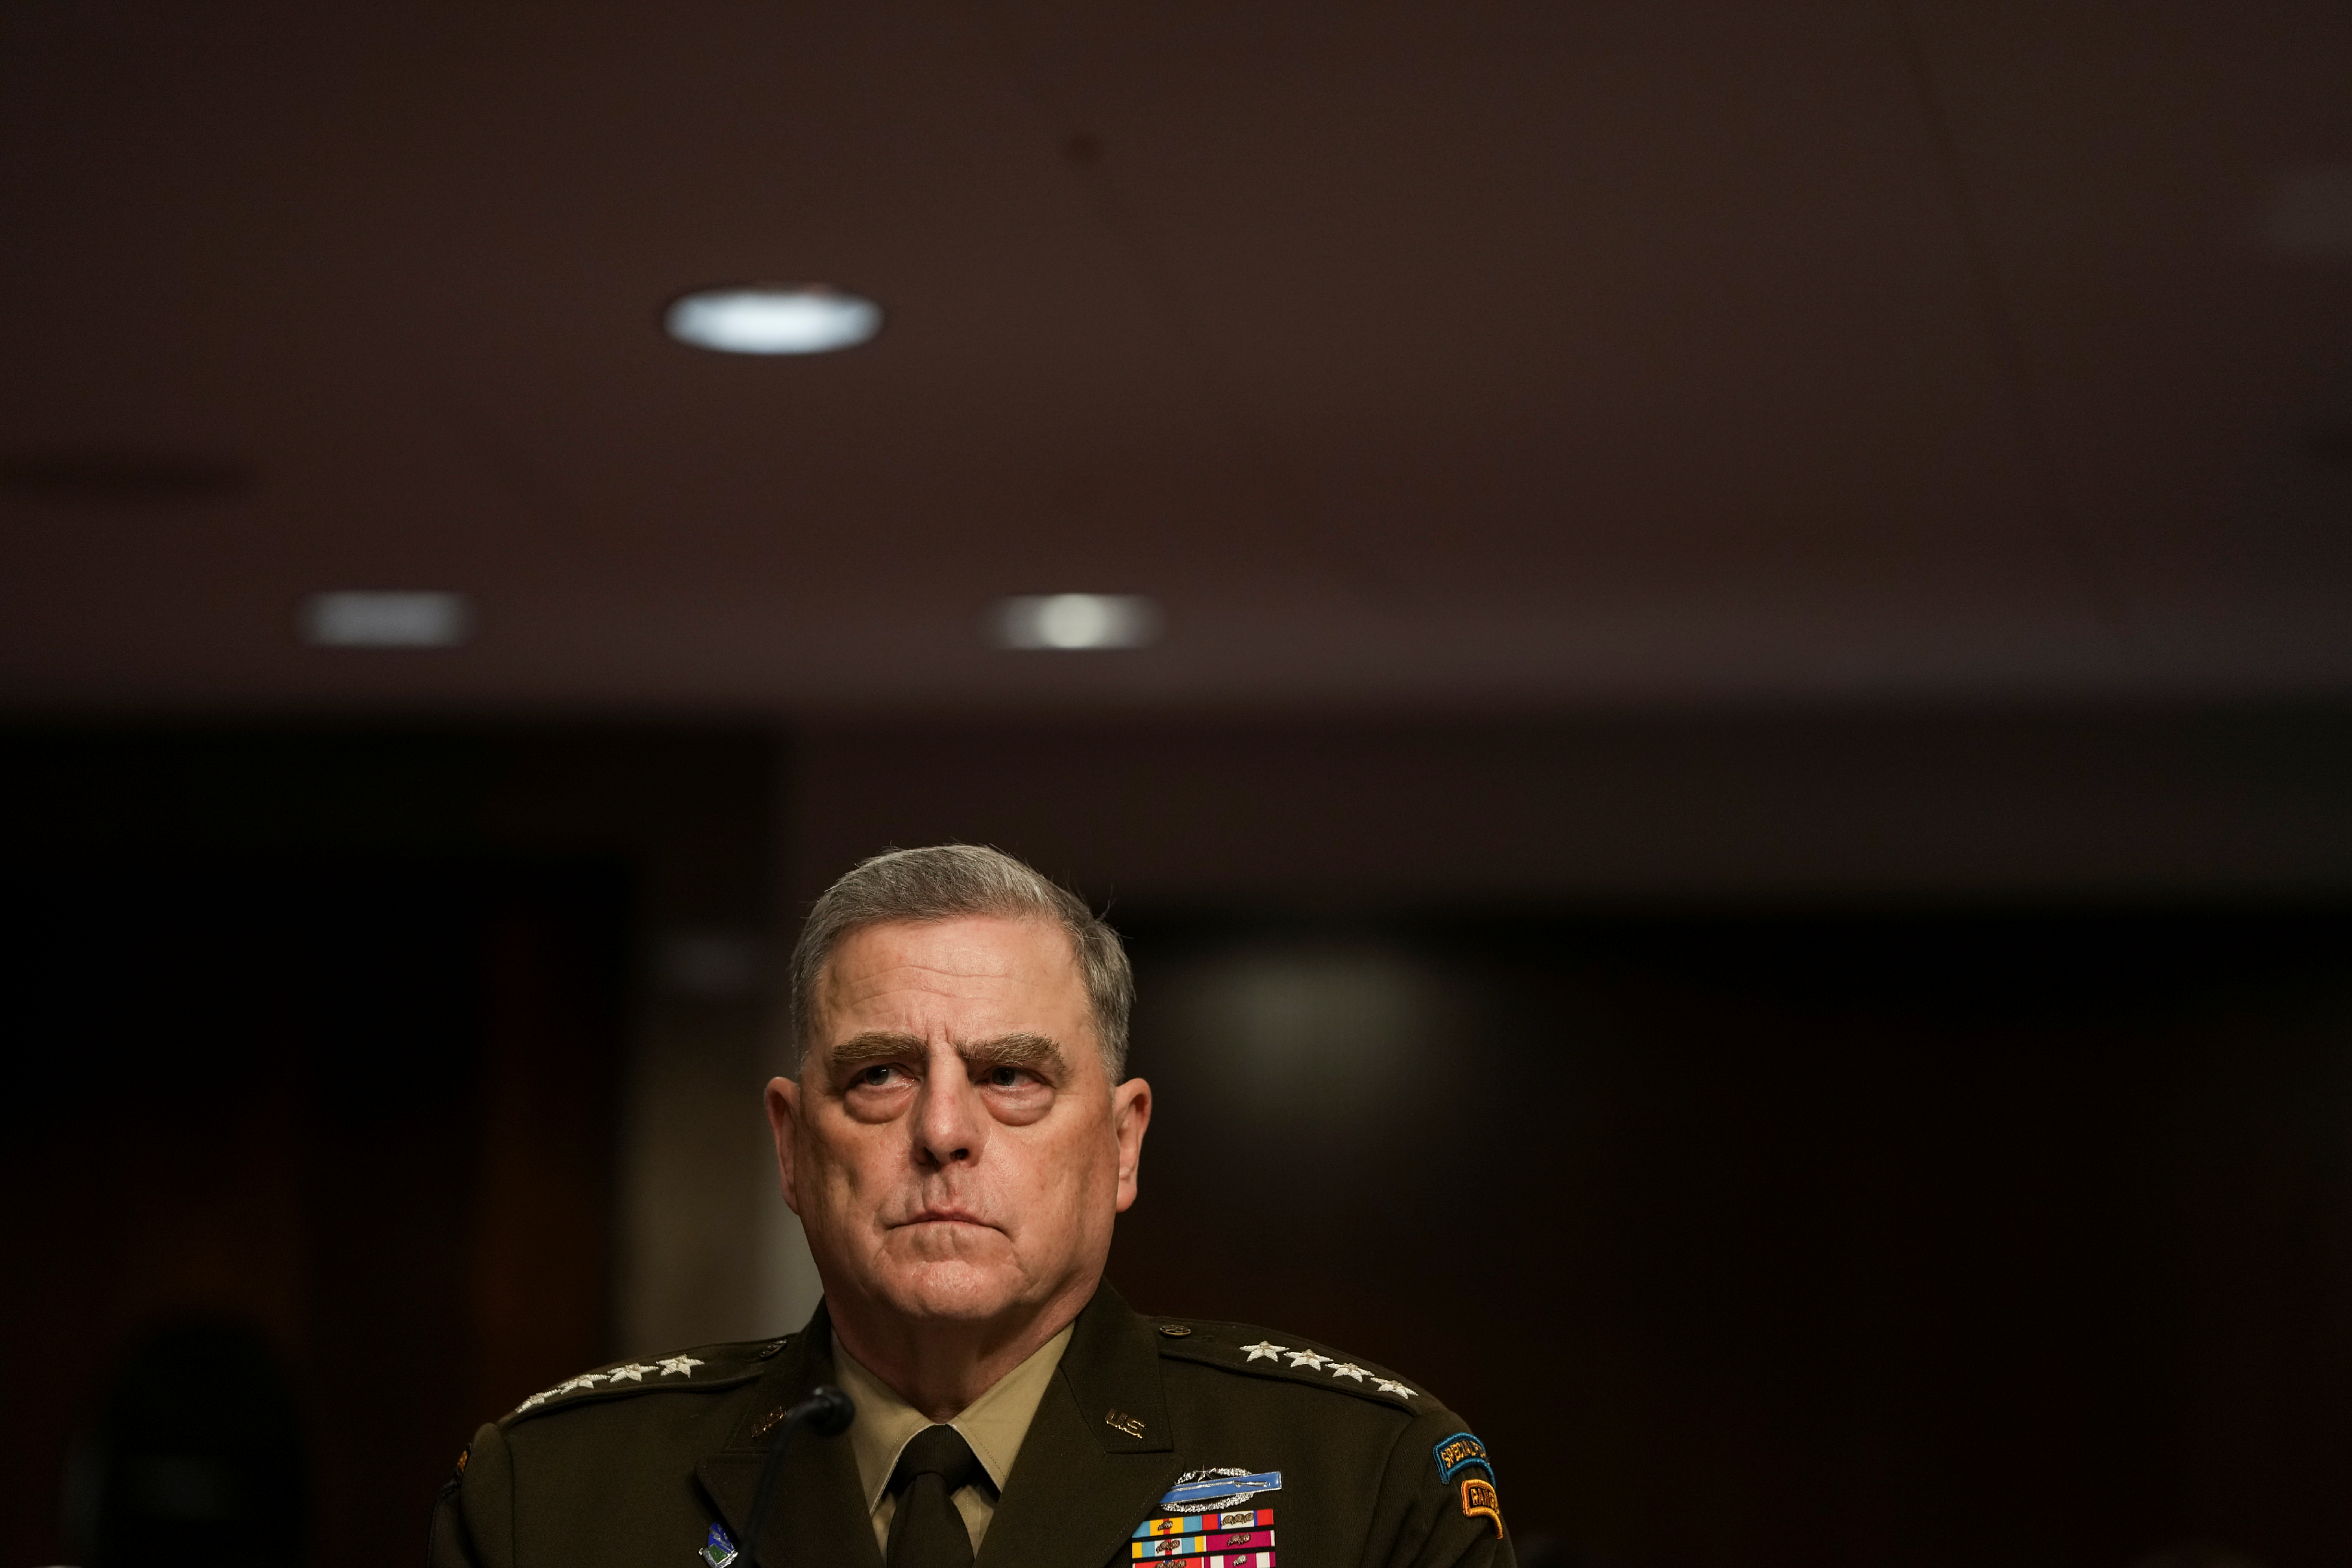 Chairman of the Joint Chiefs of Staff General Mark Milley attends a Senate Armed Services Committee hearing on the conclusion of military operations in Afghanistan and plans for future counterterrorism operations, on Capitol Hill in Washington, U.S., September 28, 2021. Sarahbeth Maney/Pool via REUTERS